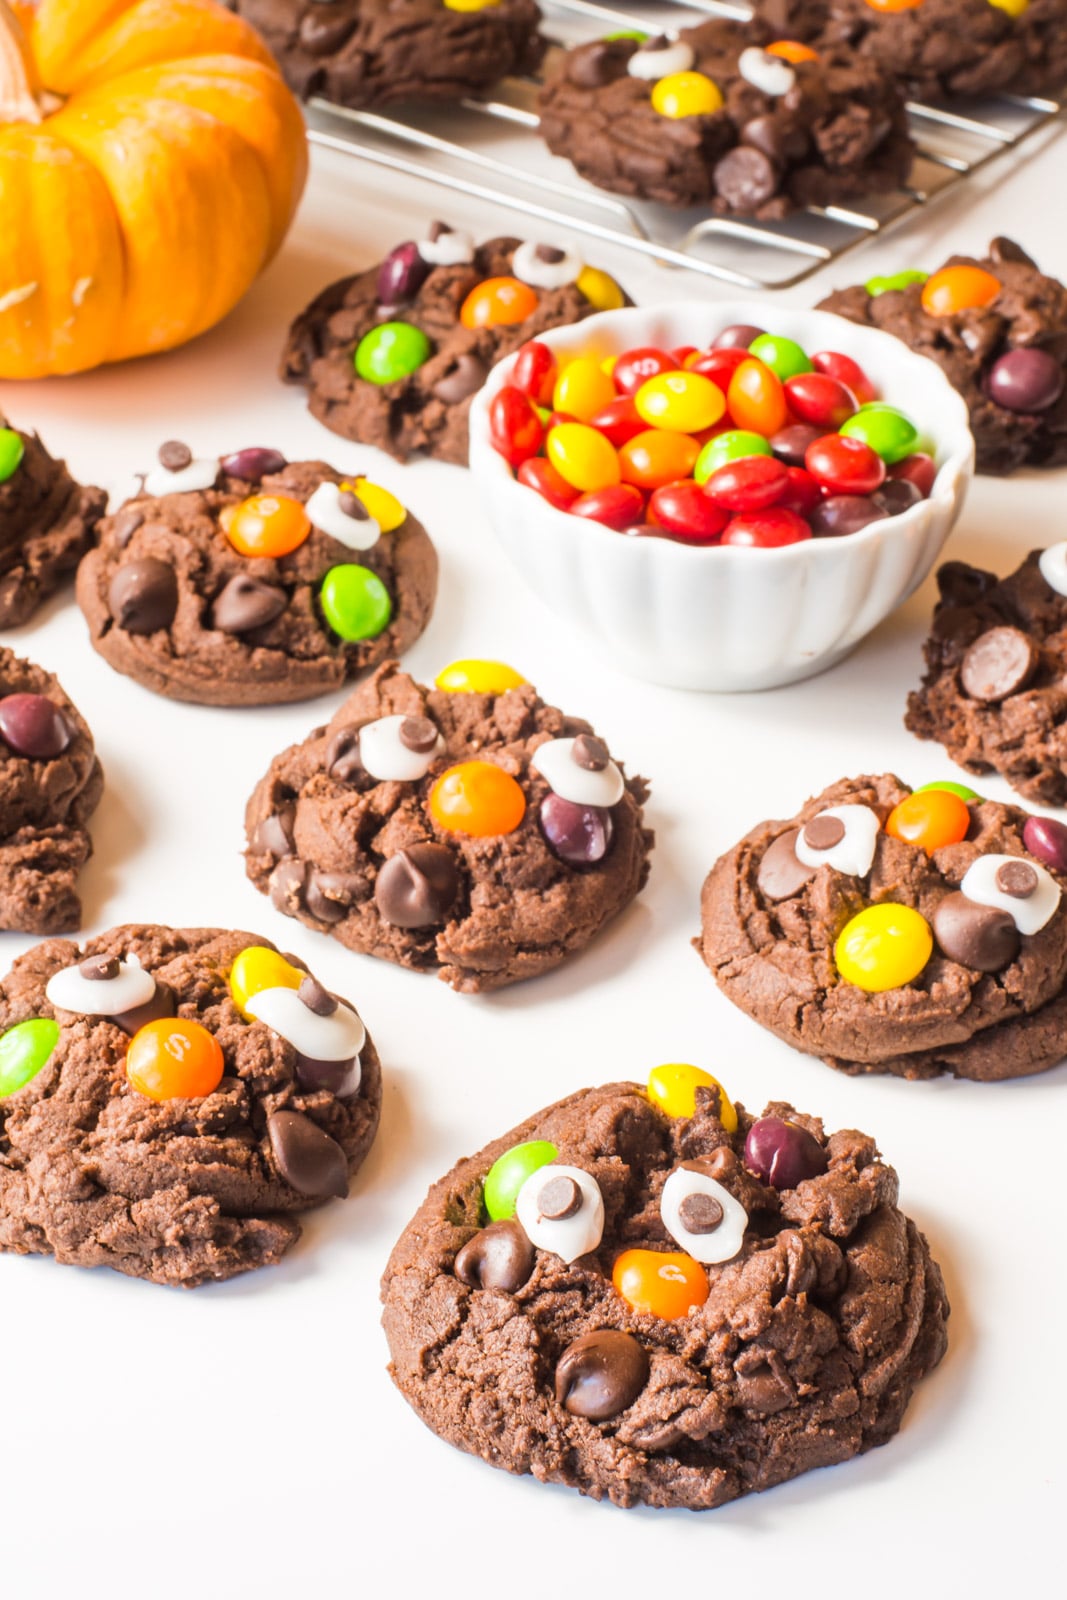 Several Halloween Monster cookies have candy eyes and colorful skittles on top. There's a bowl of the candies and a mini pumpkin beside them.